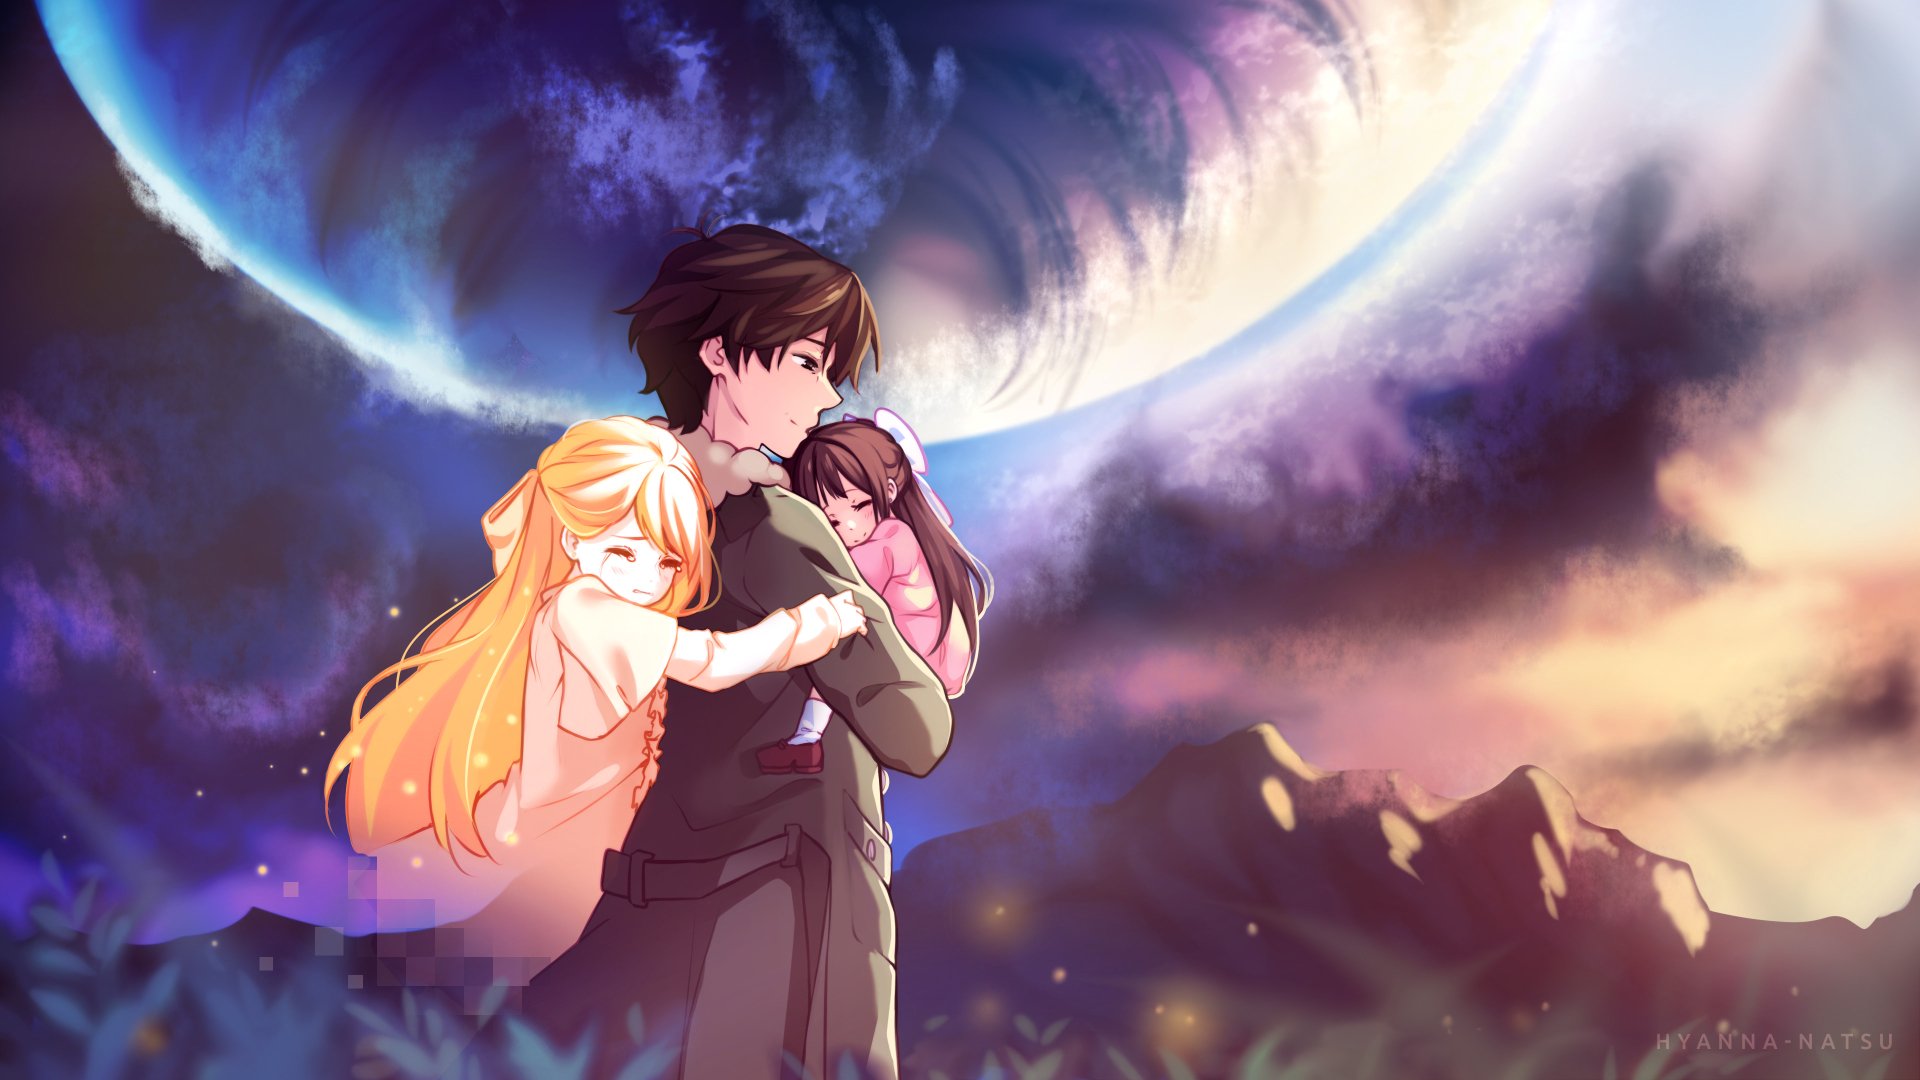 HD anime wallpaper featuring Shelter characters Rin and others in an emotional embrace under a dramatic night sky with a large planet in the background.